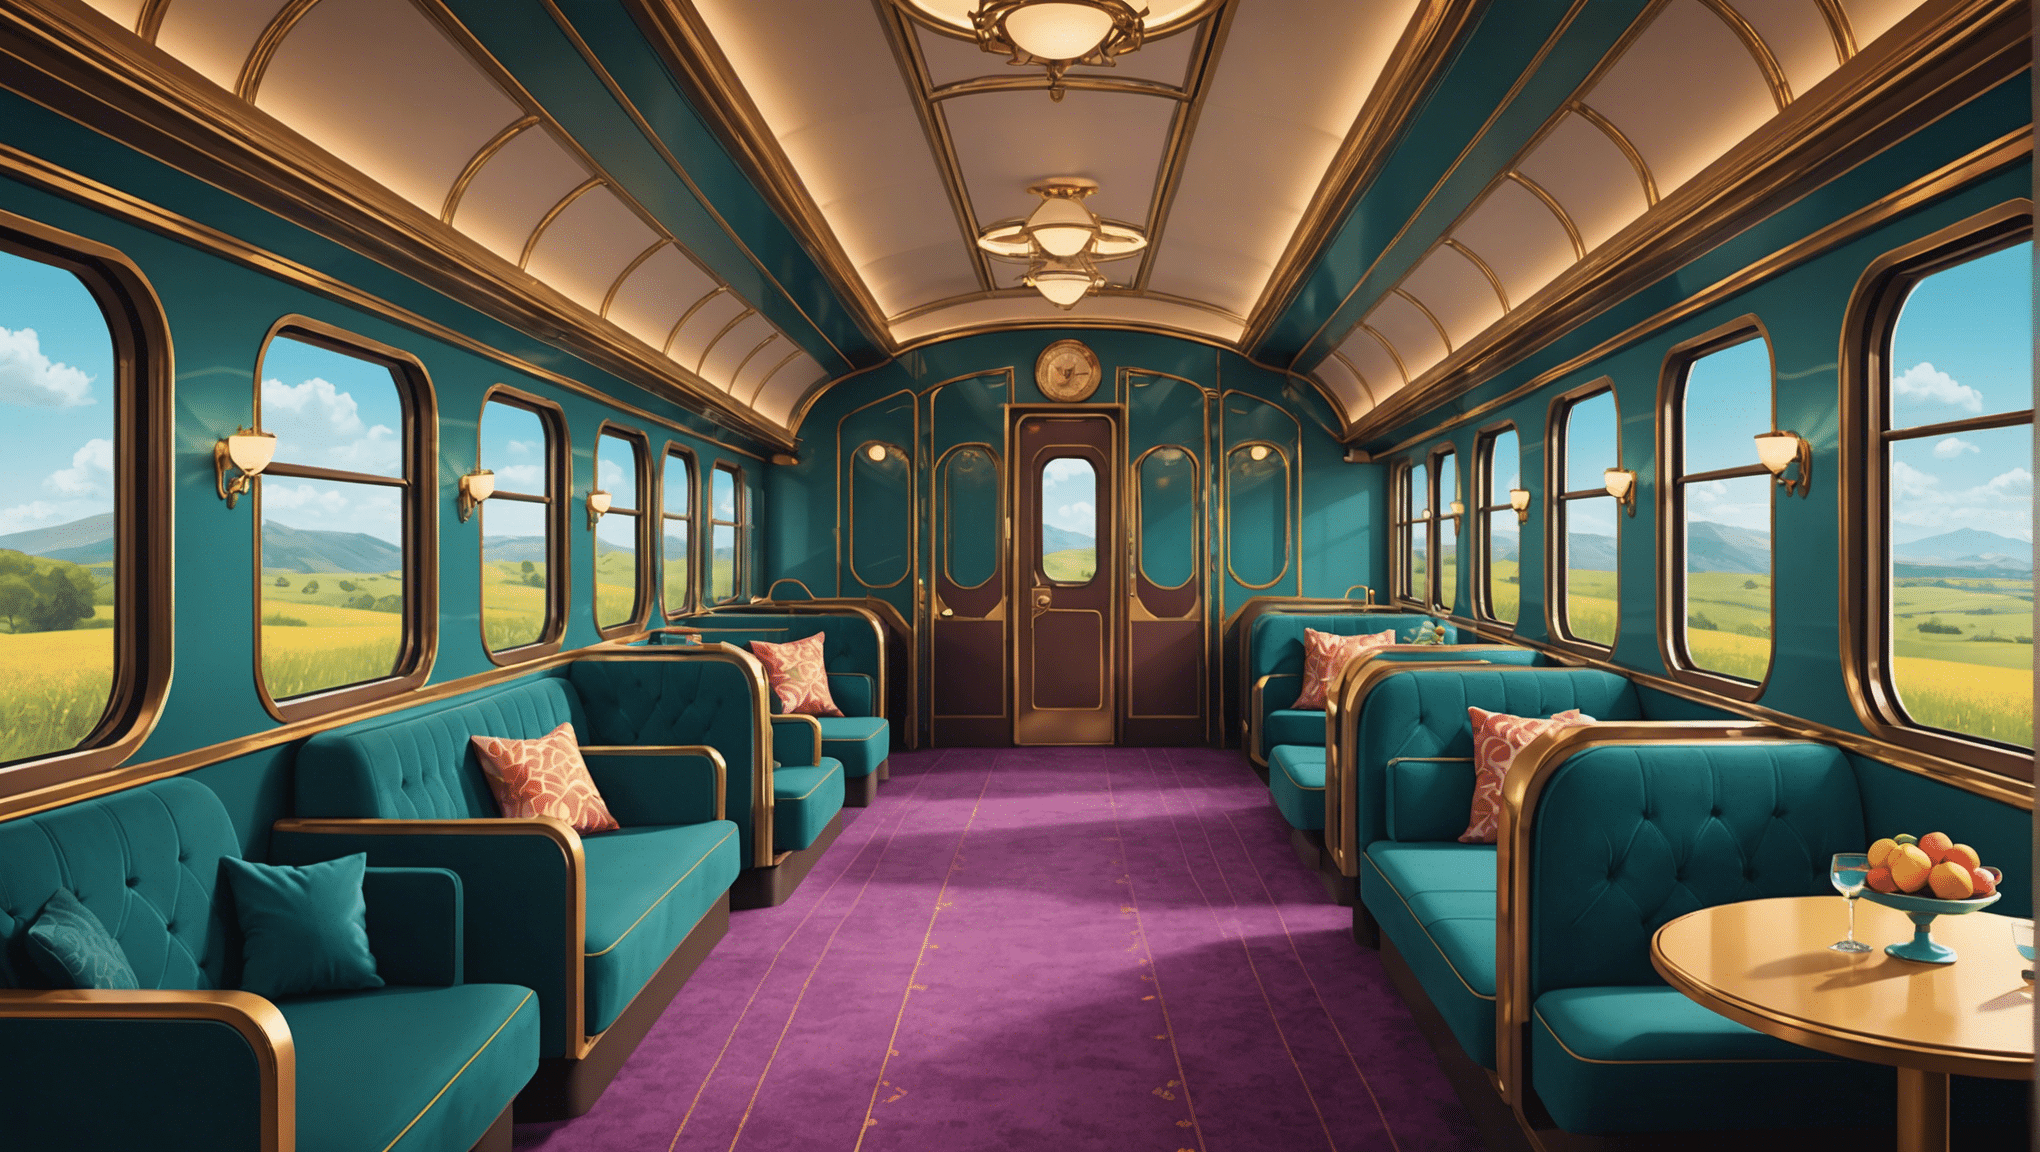 discover the unforgettable experience of luxury train travel in sumptuous settings, for lasting memories.